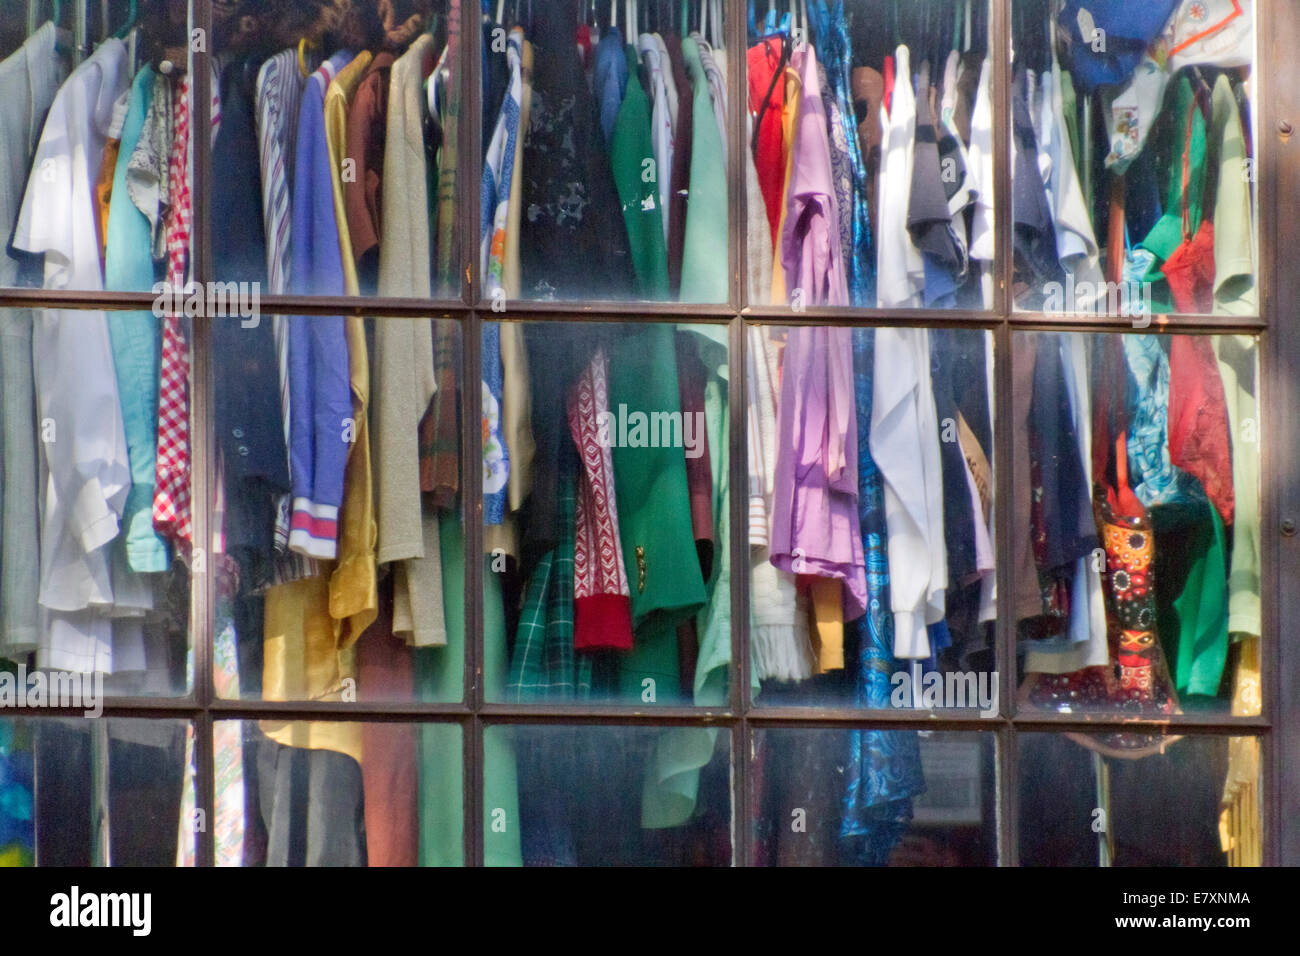 Used clothing on hangers displayed in a thrift store window Stock Photo